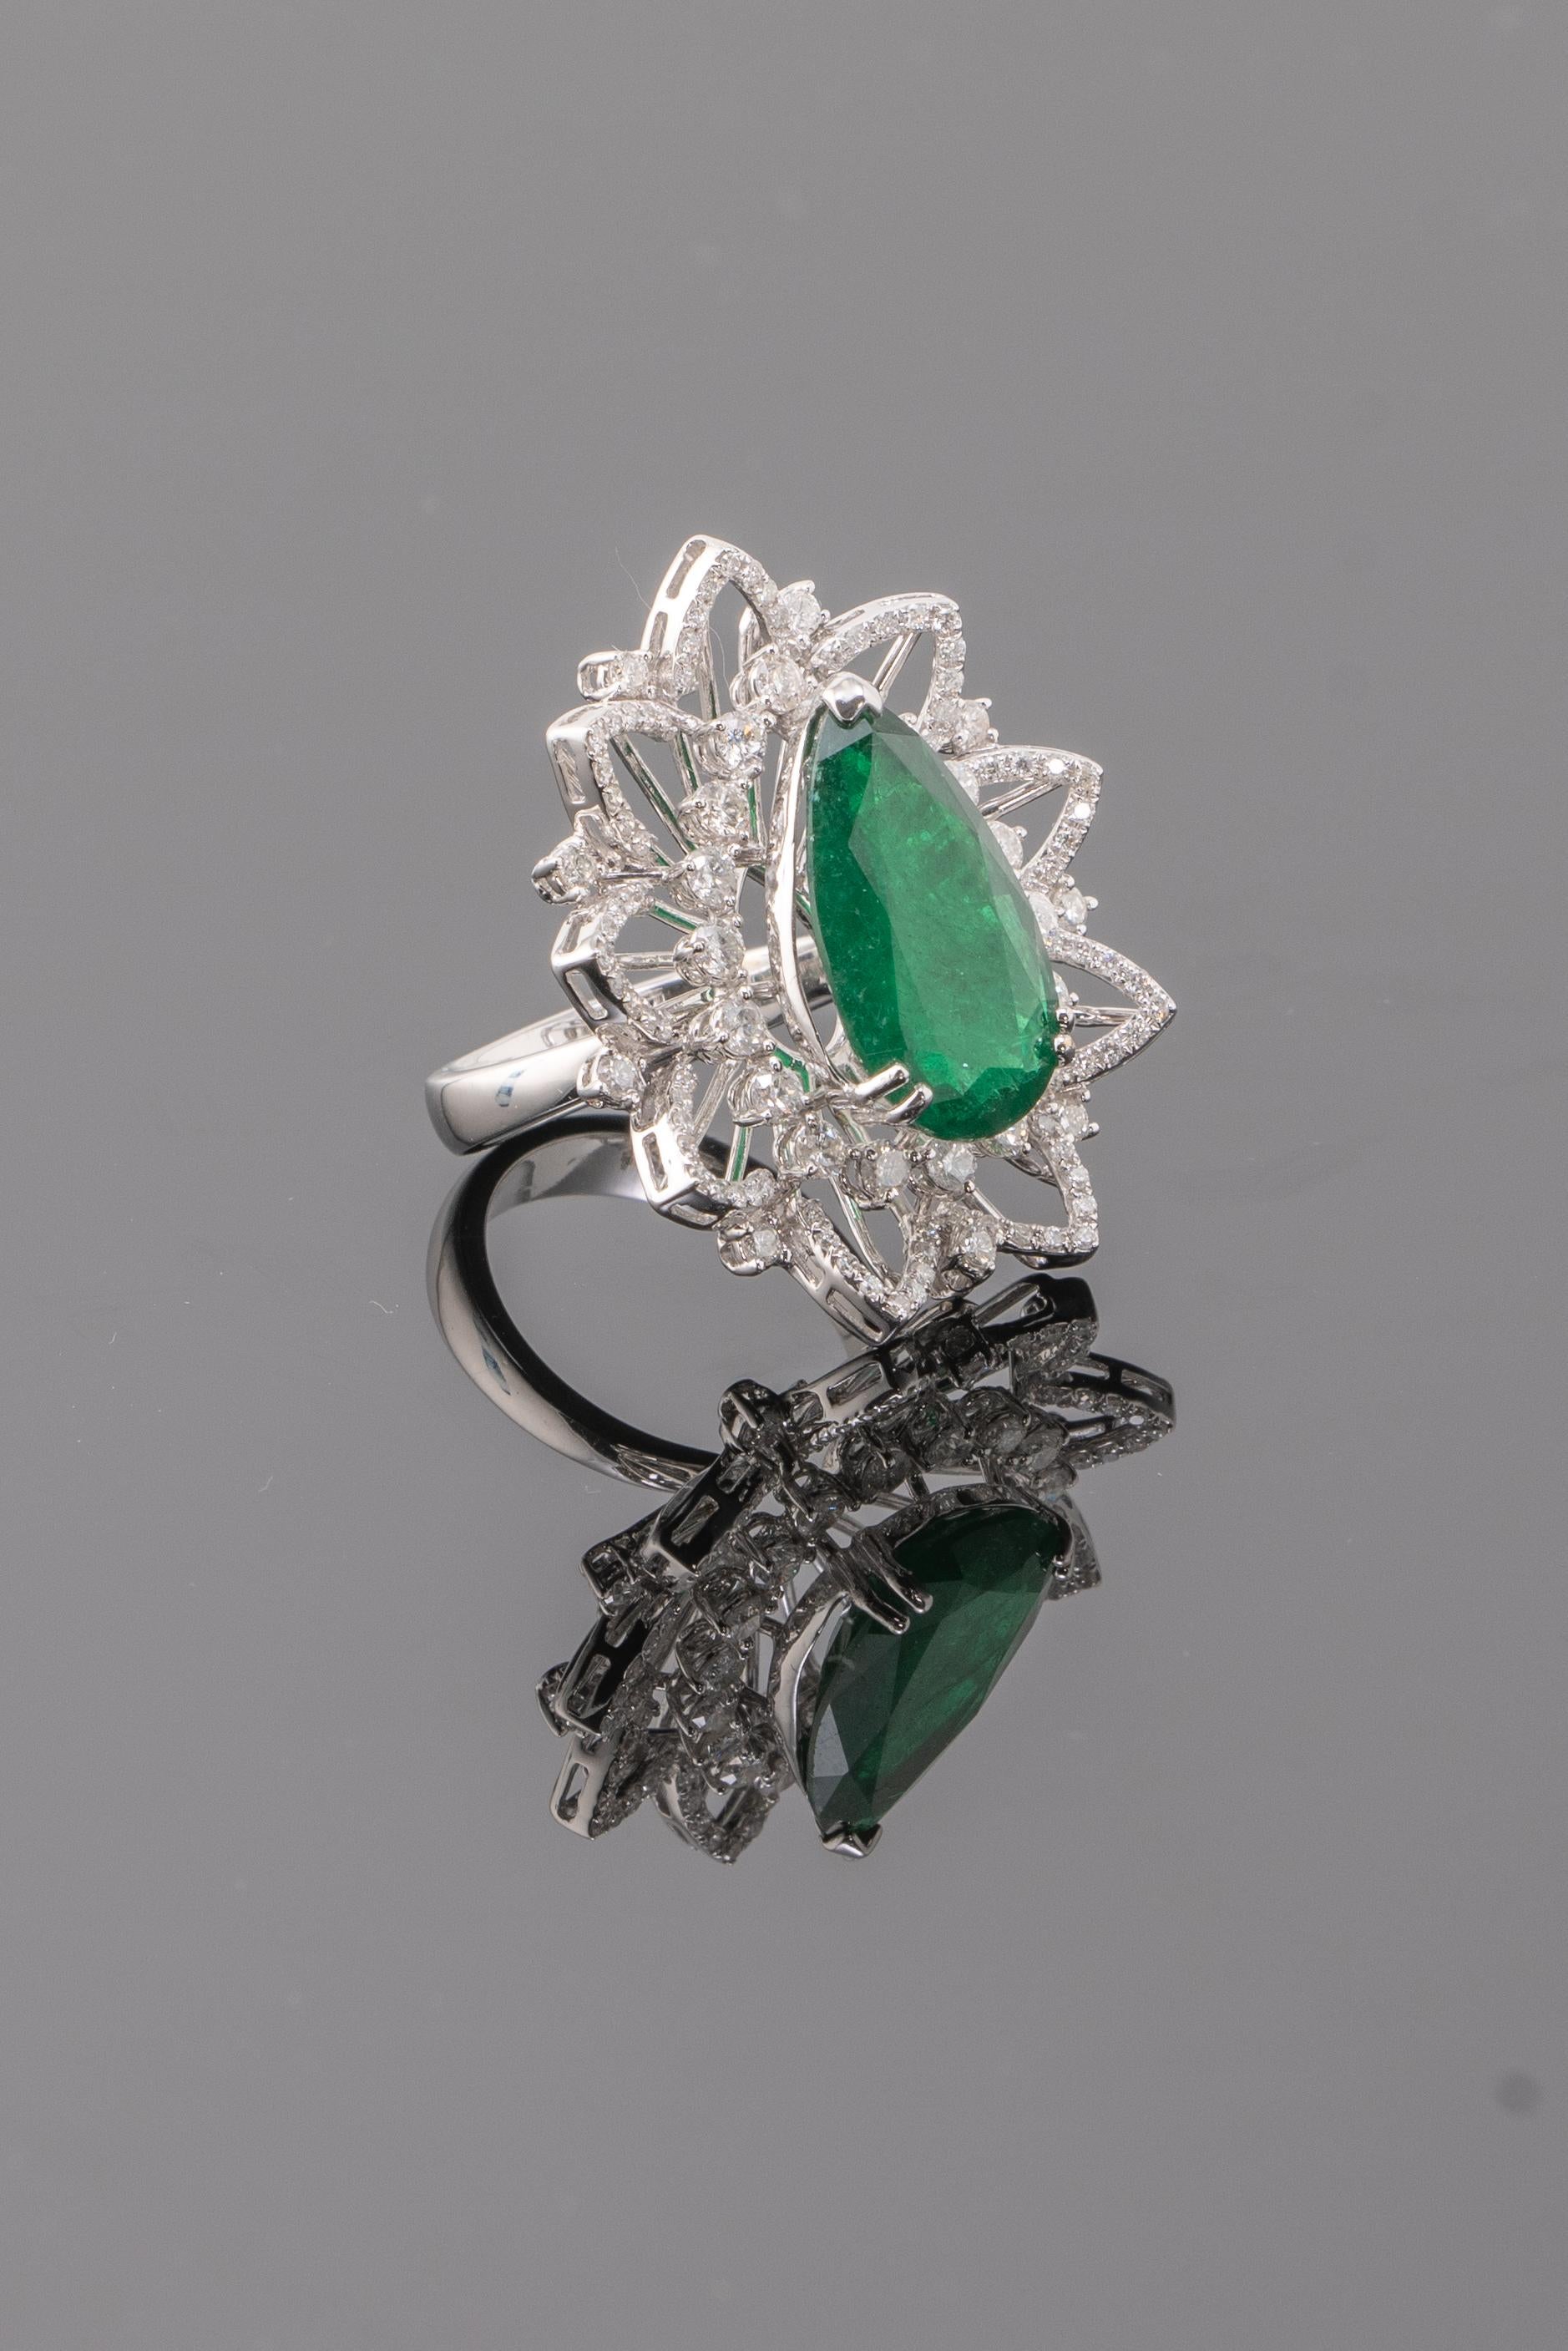 A very unique, 7.18 carat pear shape natural Zambian Emerald and Diamond cocktail ring set in solid 18K White Gold. Currently sized at US 6, can be changed upon request. Please feel free to message us if you have any queries. Free shipping provided.